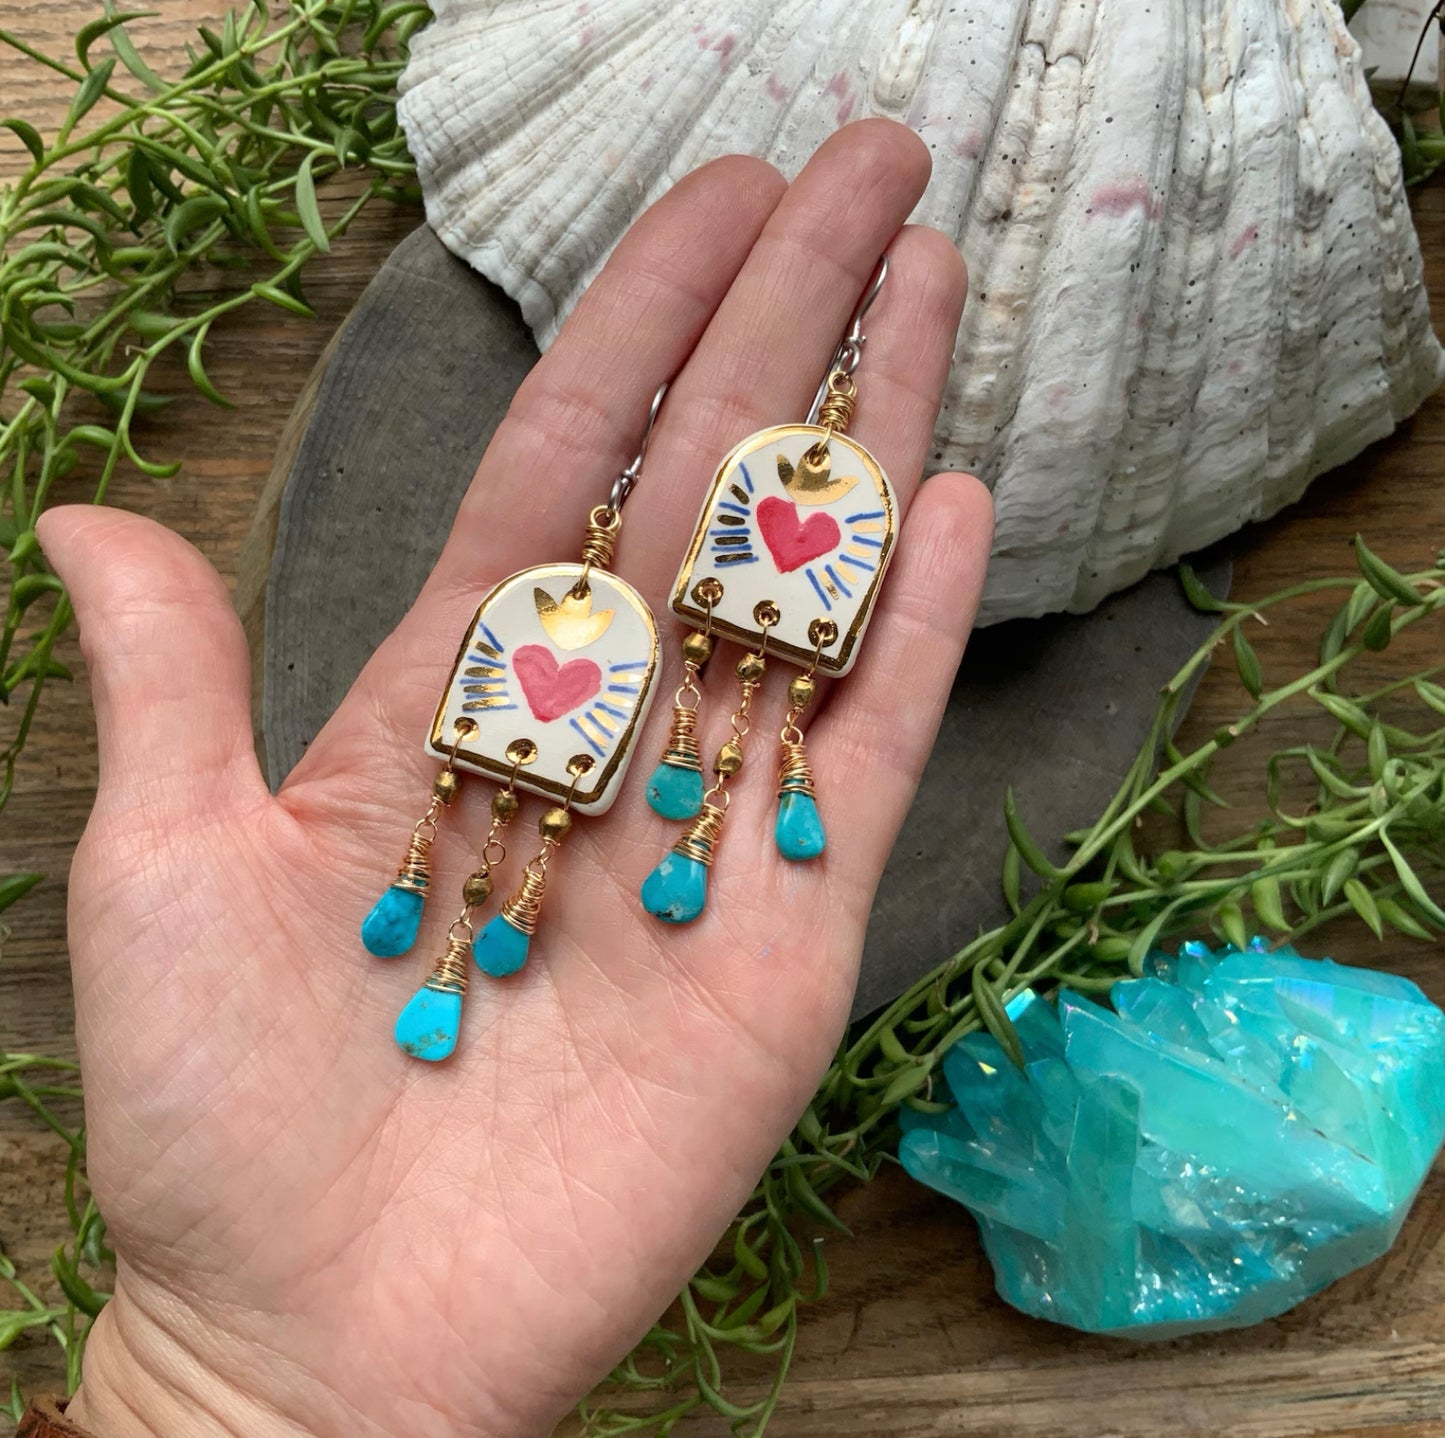 Ceramic milagros and genuine turquoise earrings